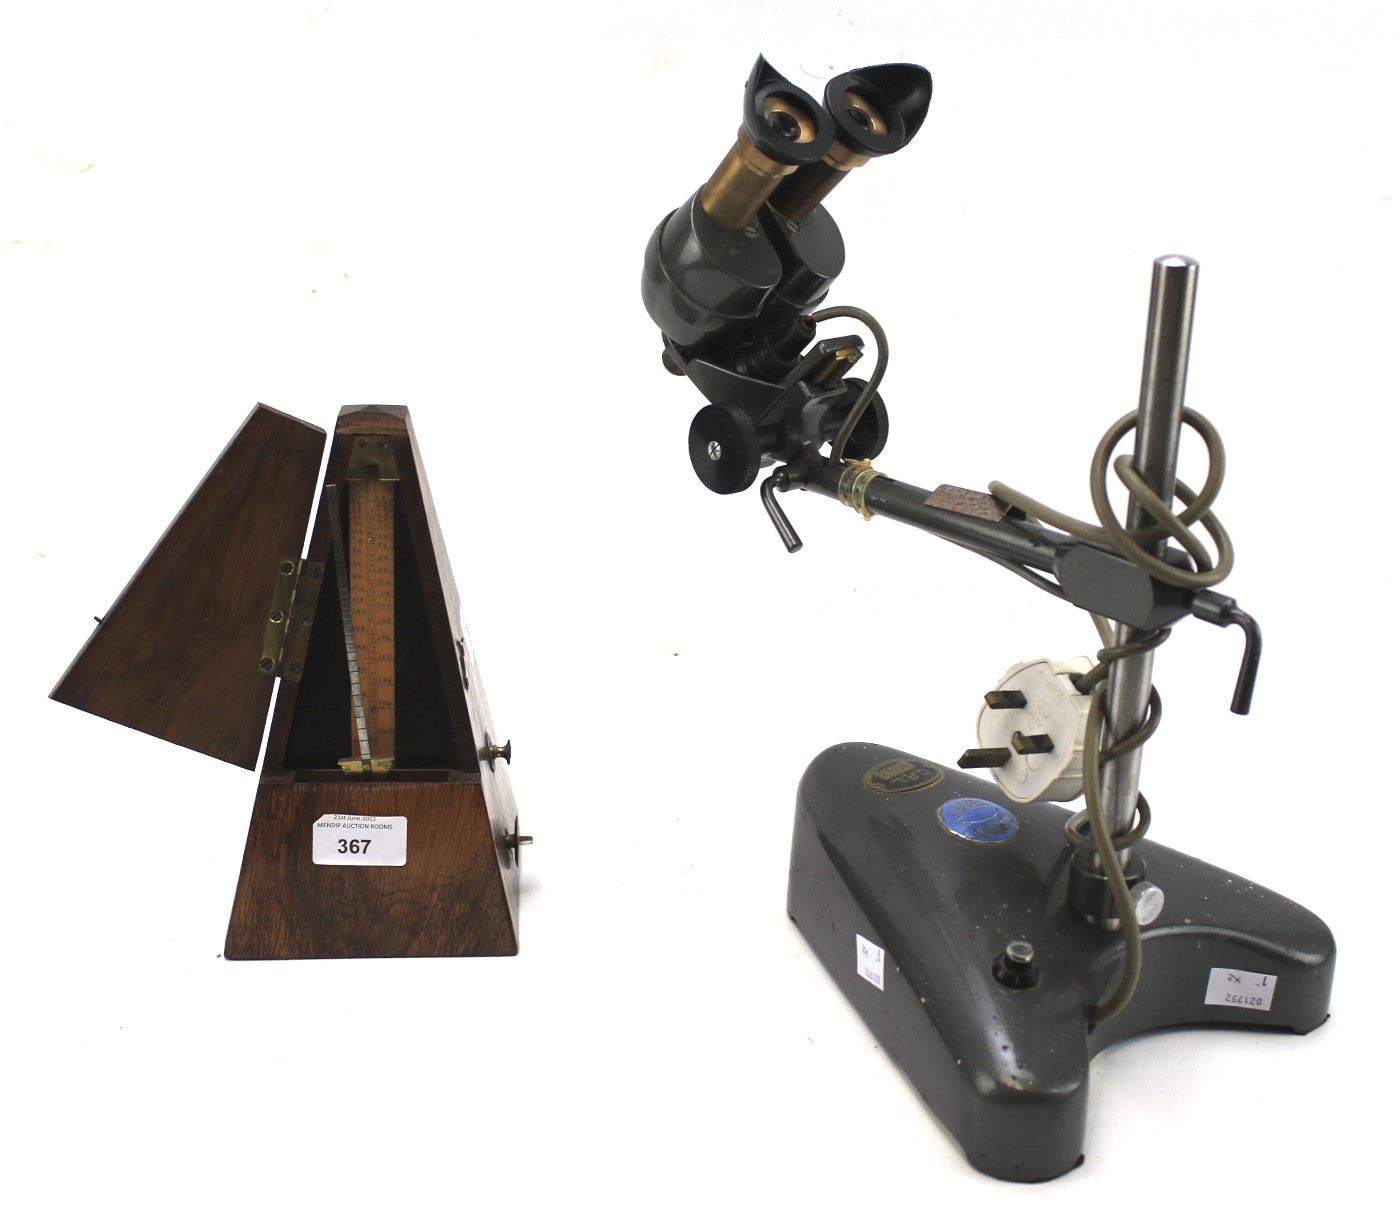 A De Maelzel Metronome and a C Baker microscope. The metronome in a rosewood case, H23.